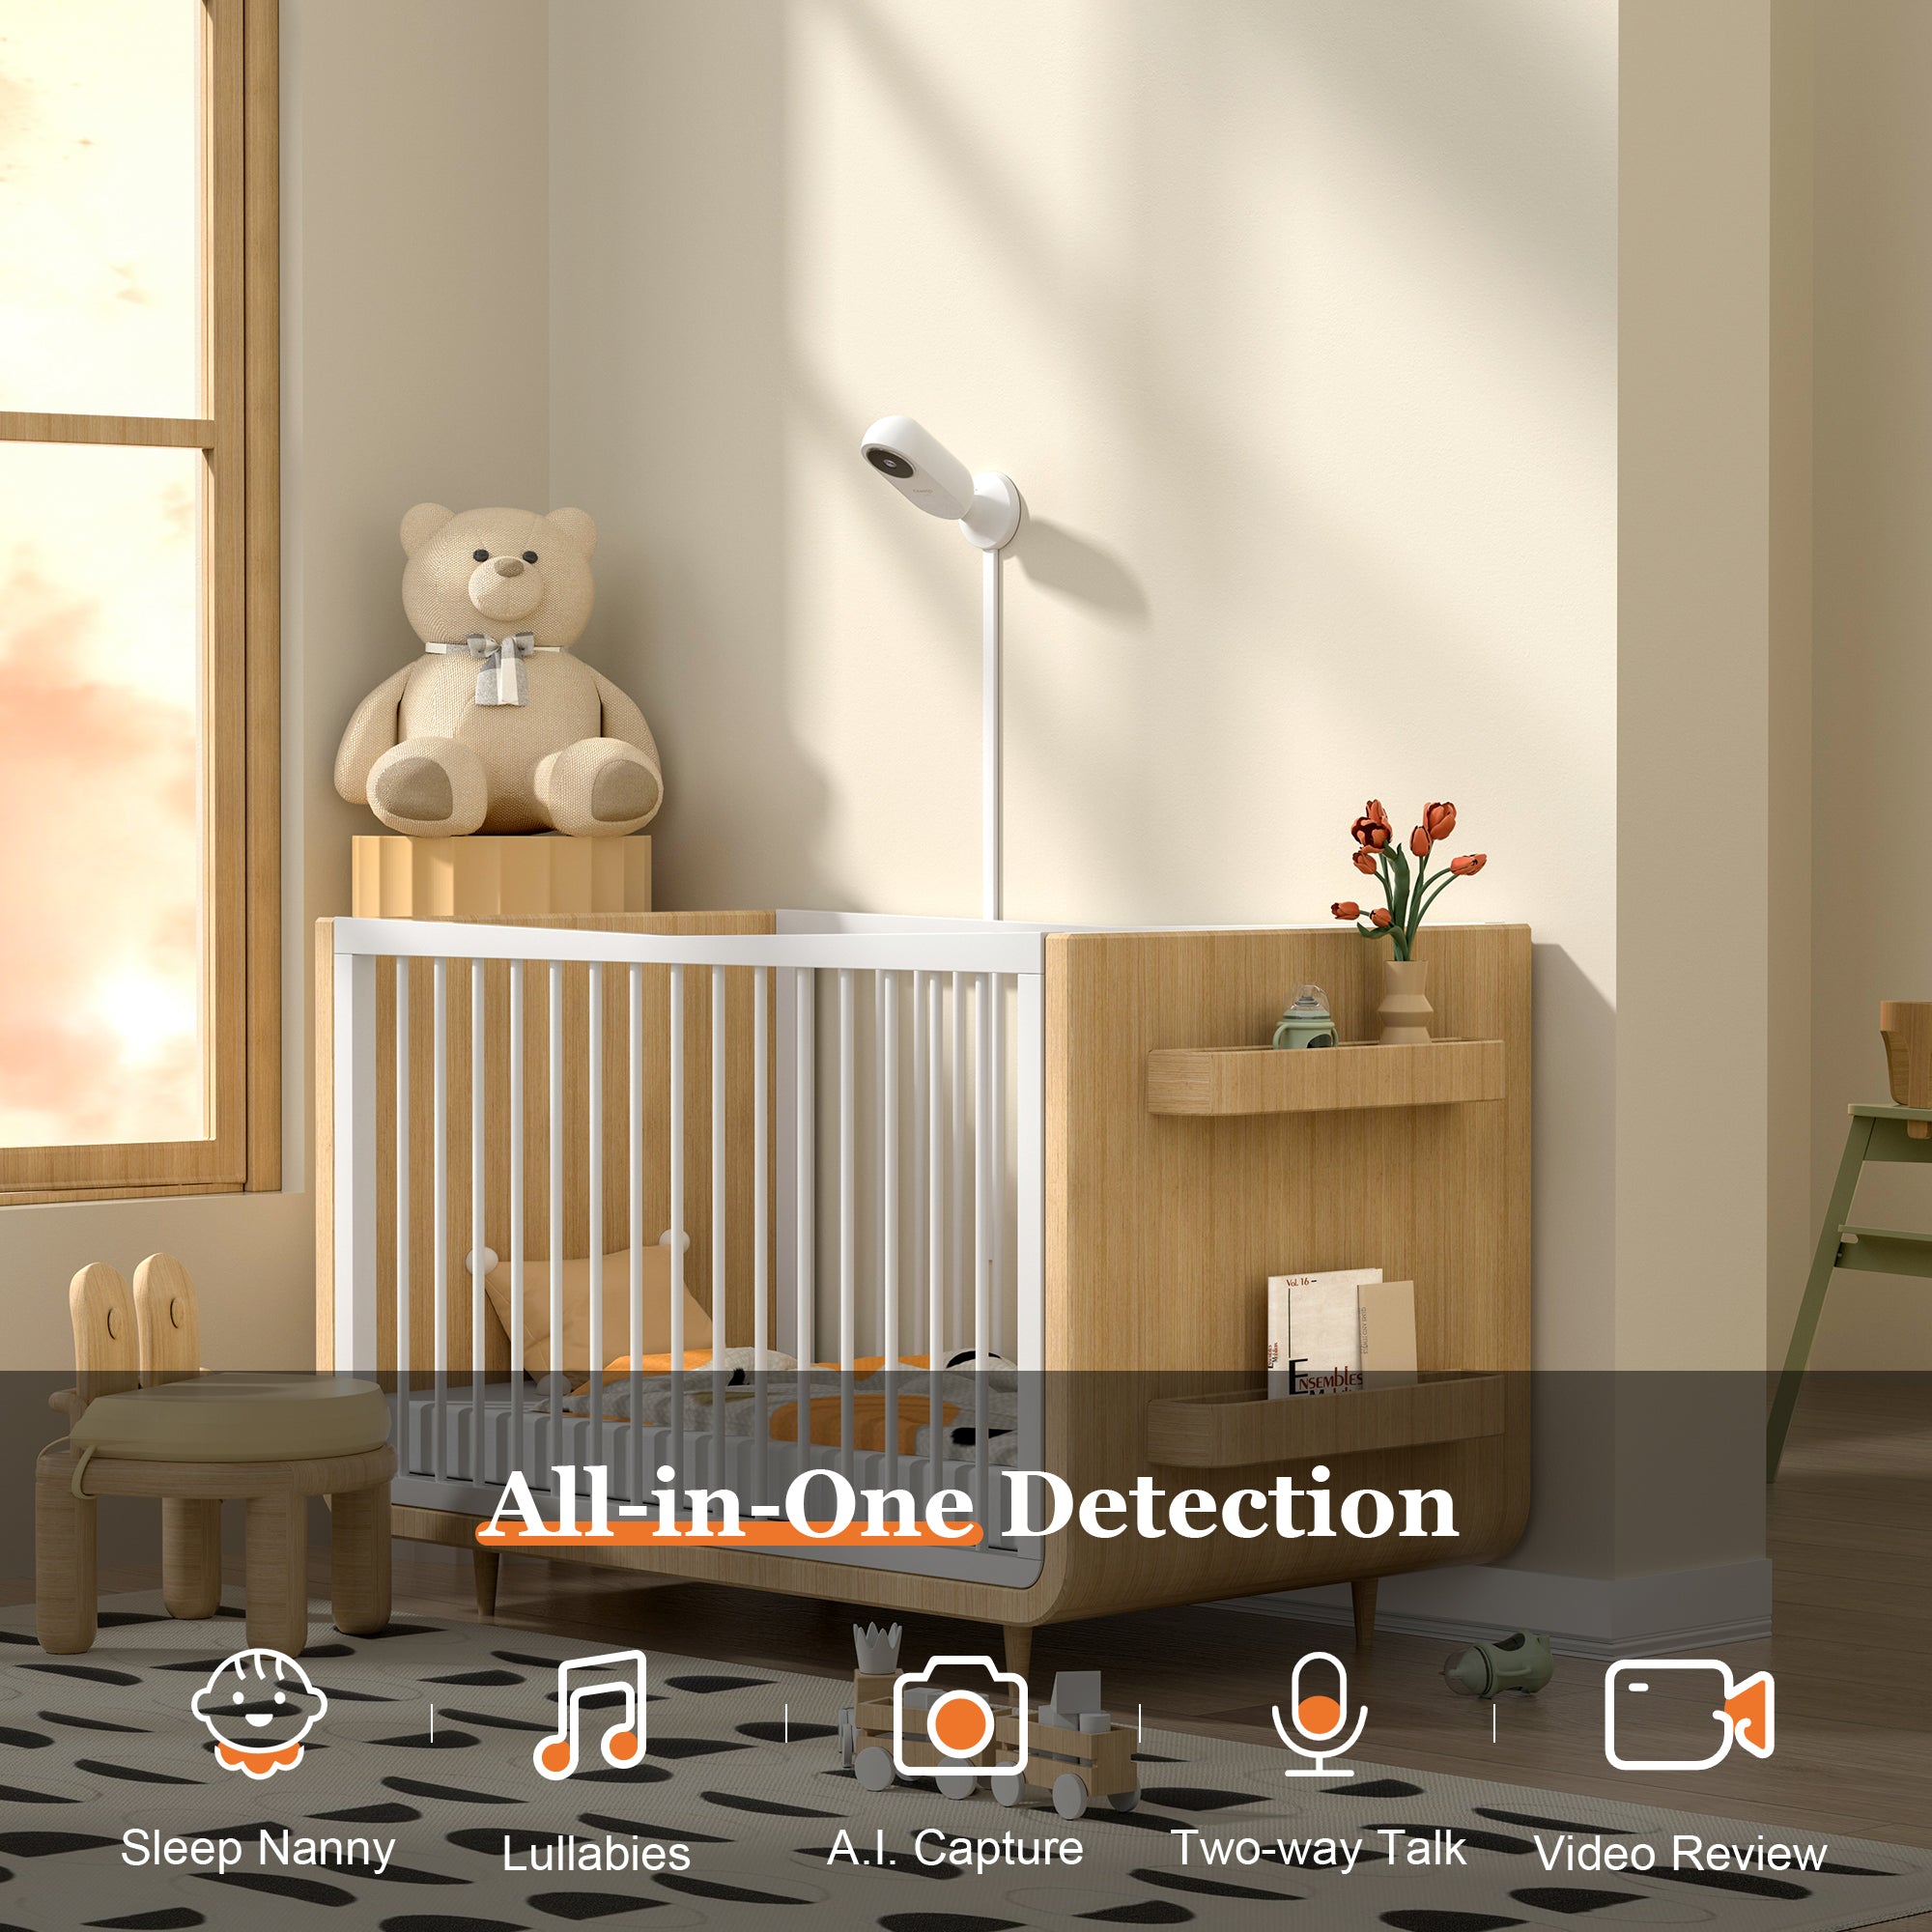 Cheego X3 Pro Smart Baby Monitor HD Video Camera and Audio, Realtime Breathing and Sleep Tracking, 2-Way Talk, Nightlight and Night Vision, Room Humidity & Temp, Wake up & Crying Detection, Works with Alexa